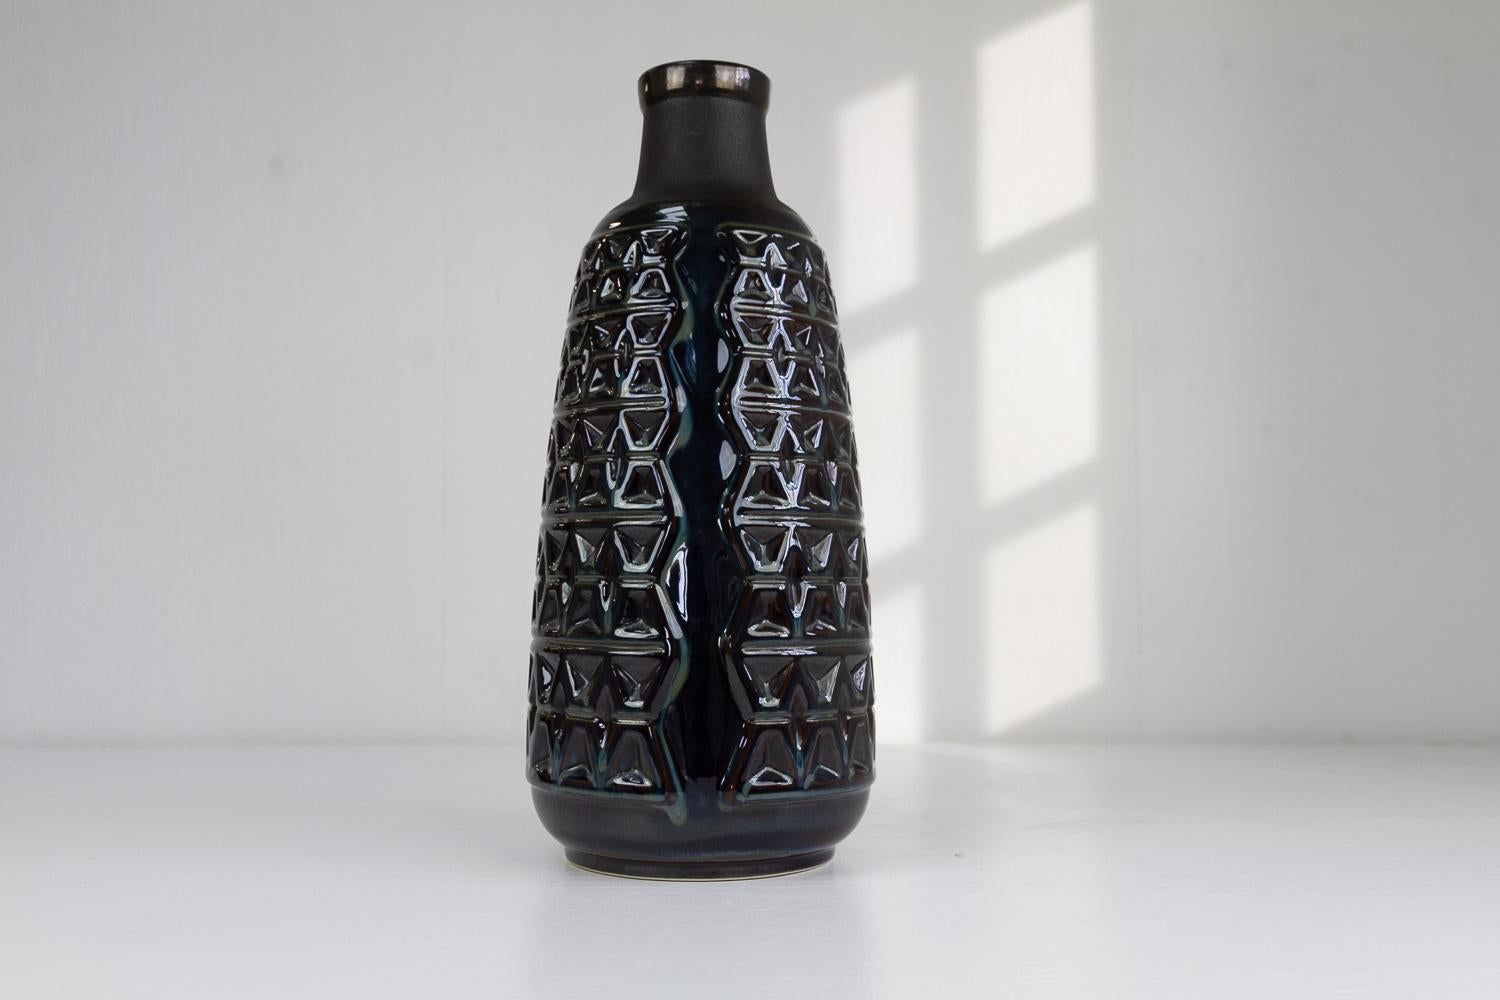 Large Danish ceramic vase in blue glaze by Einar Johansen for Søholm Denmark, 1960s.
Tall floor vase in stoneware with beautiful deep blue glazing and intricate triangular pattern. Søholm ceramic from the Danish island of Bornholm is famous for this